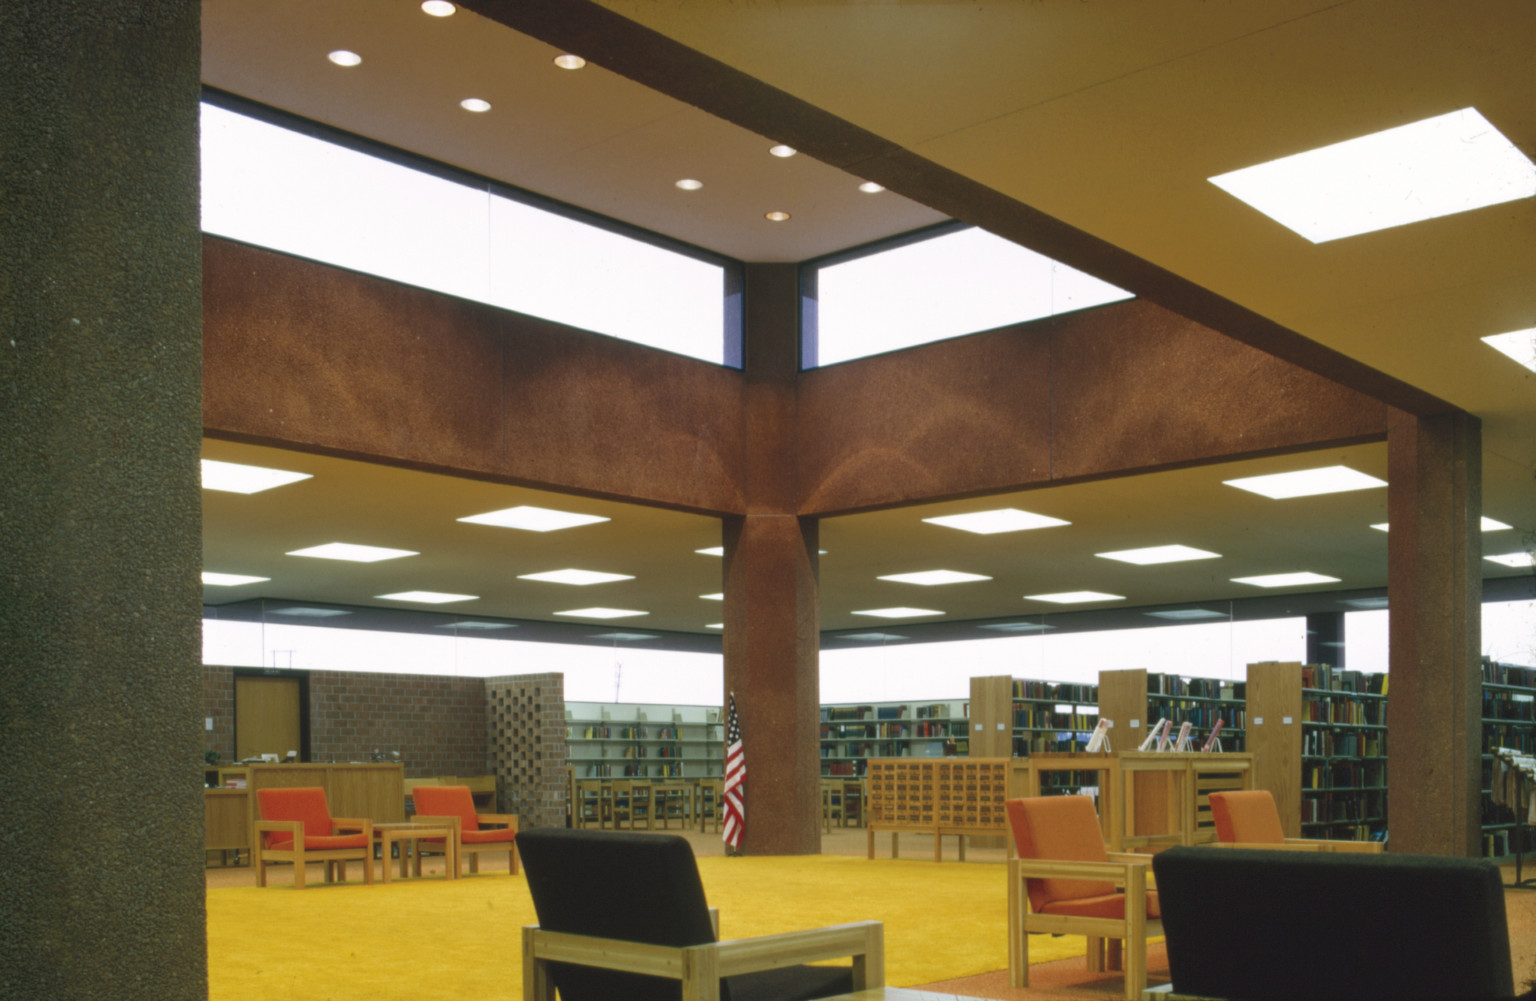 View inside Pierre Public Library, bookshelves to right and seating in center. Clerestory windows let light in from above